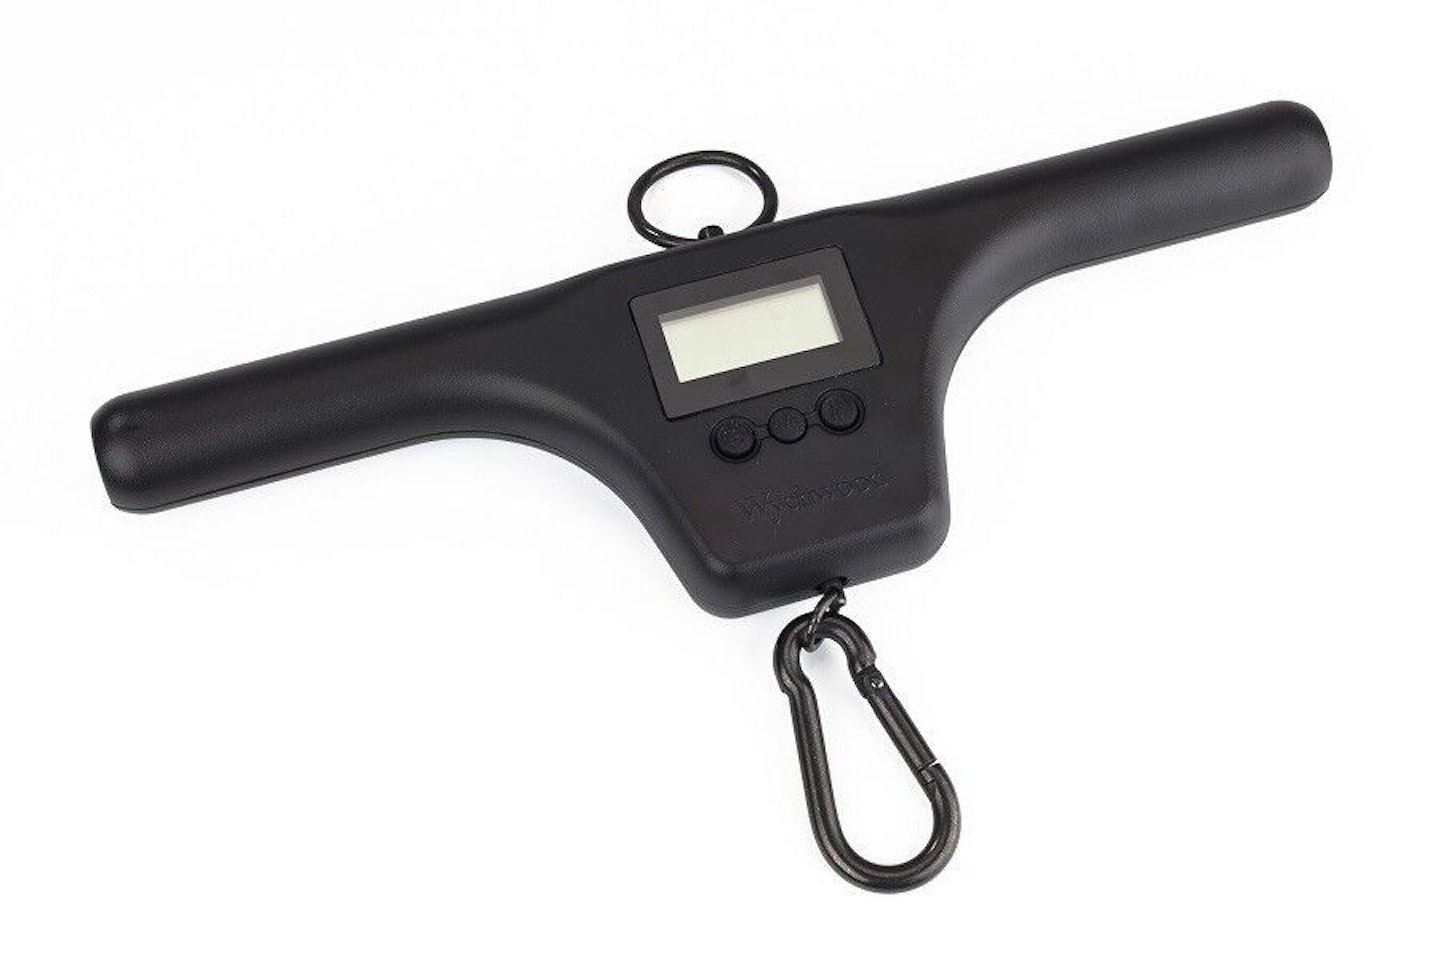 Korum Fishing Scales: Accurate & Reliable for Anglers